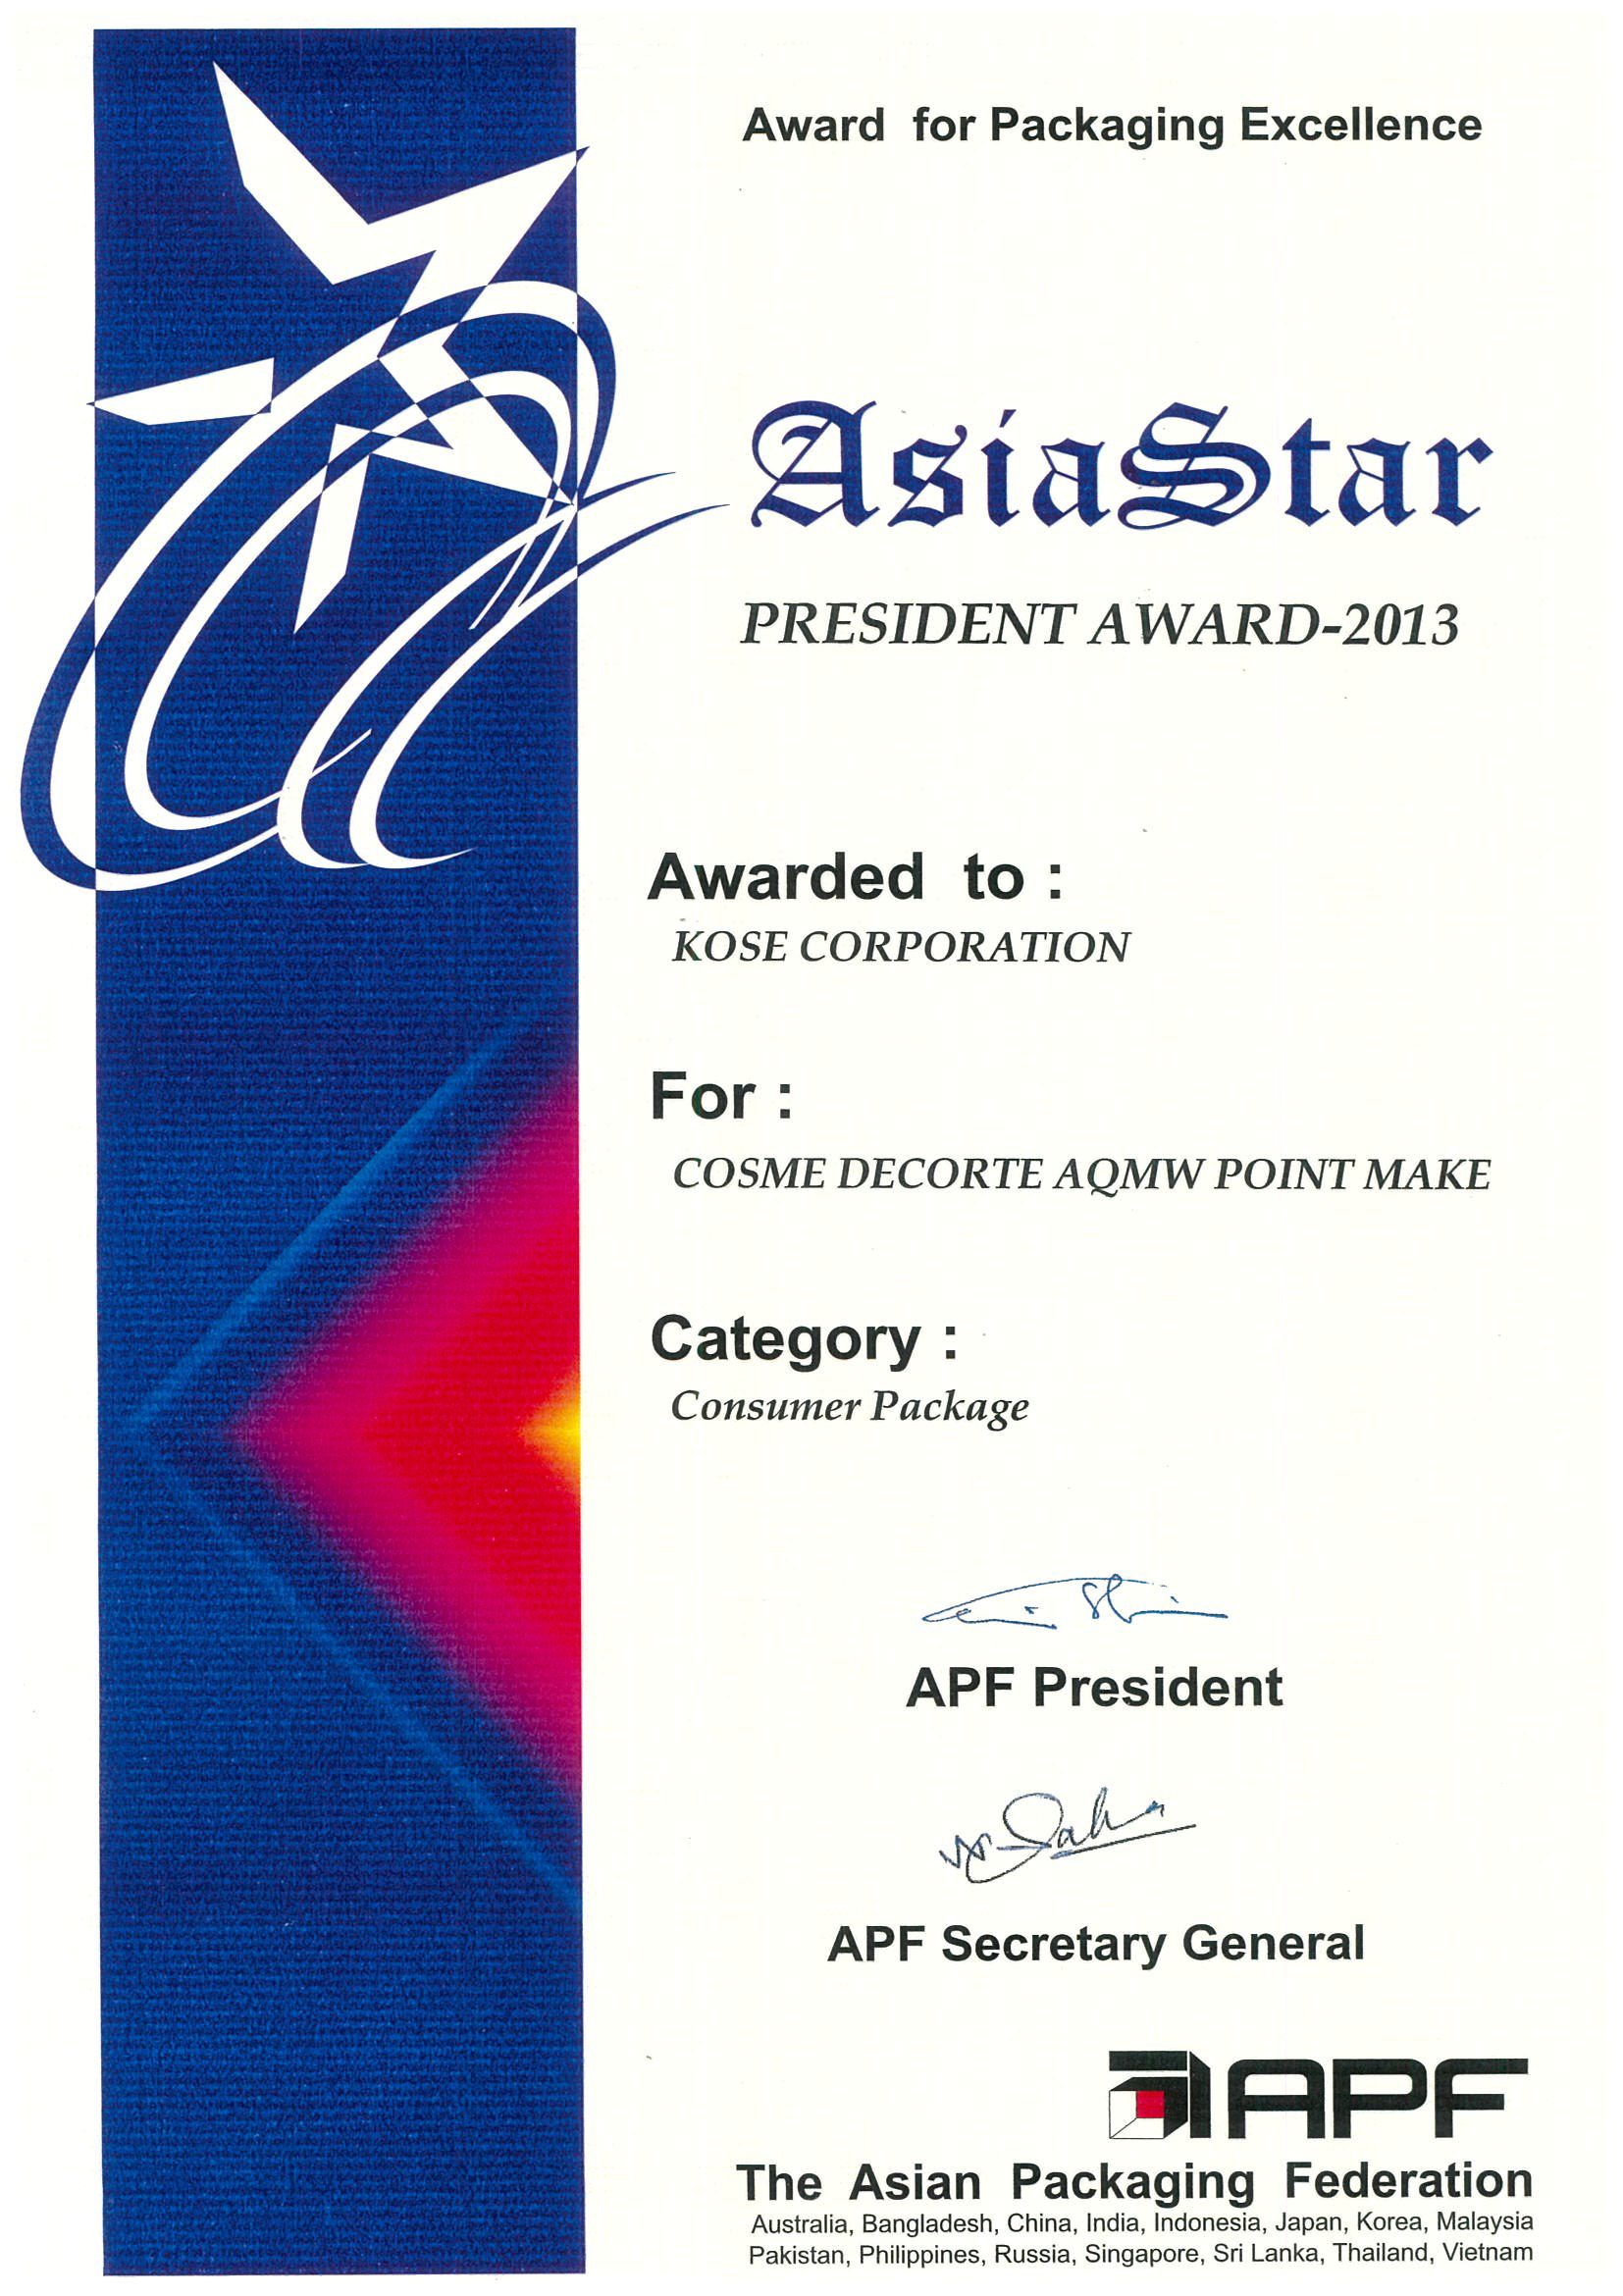 Asia Star 2013 Award for Consumer Package